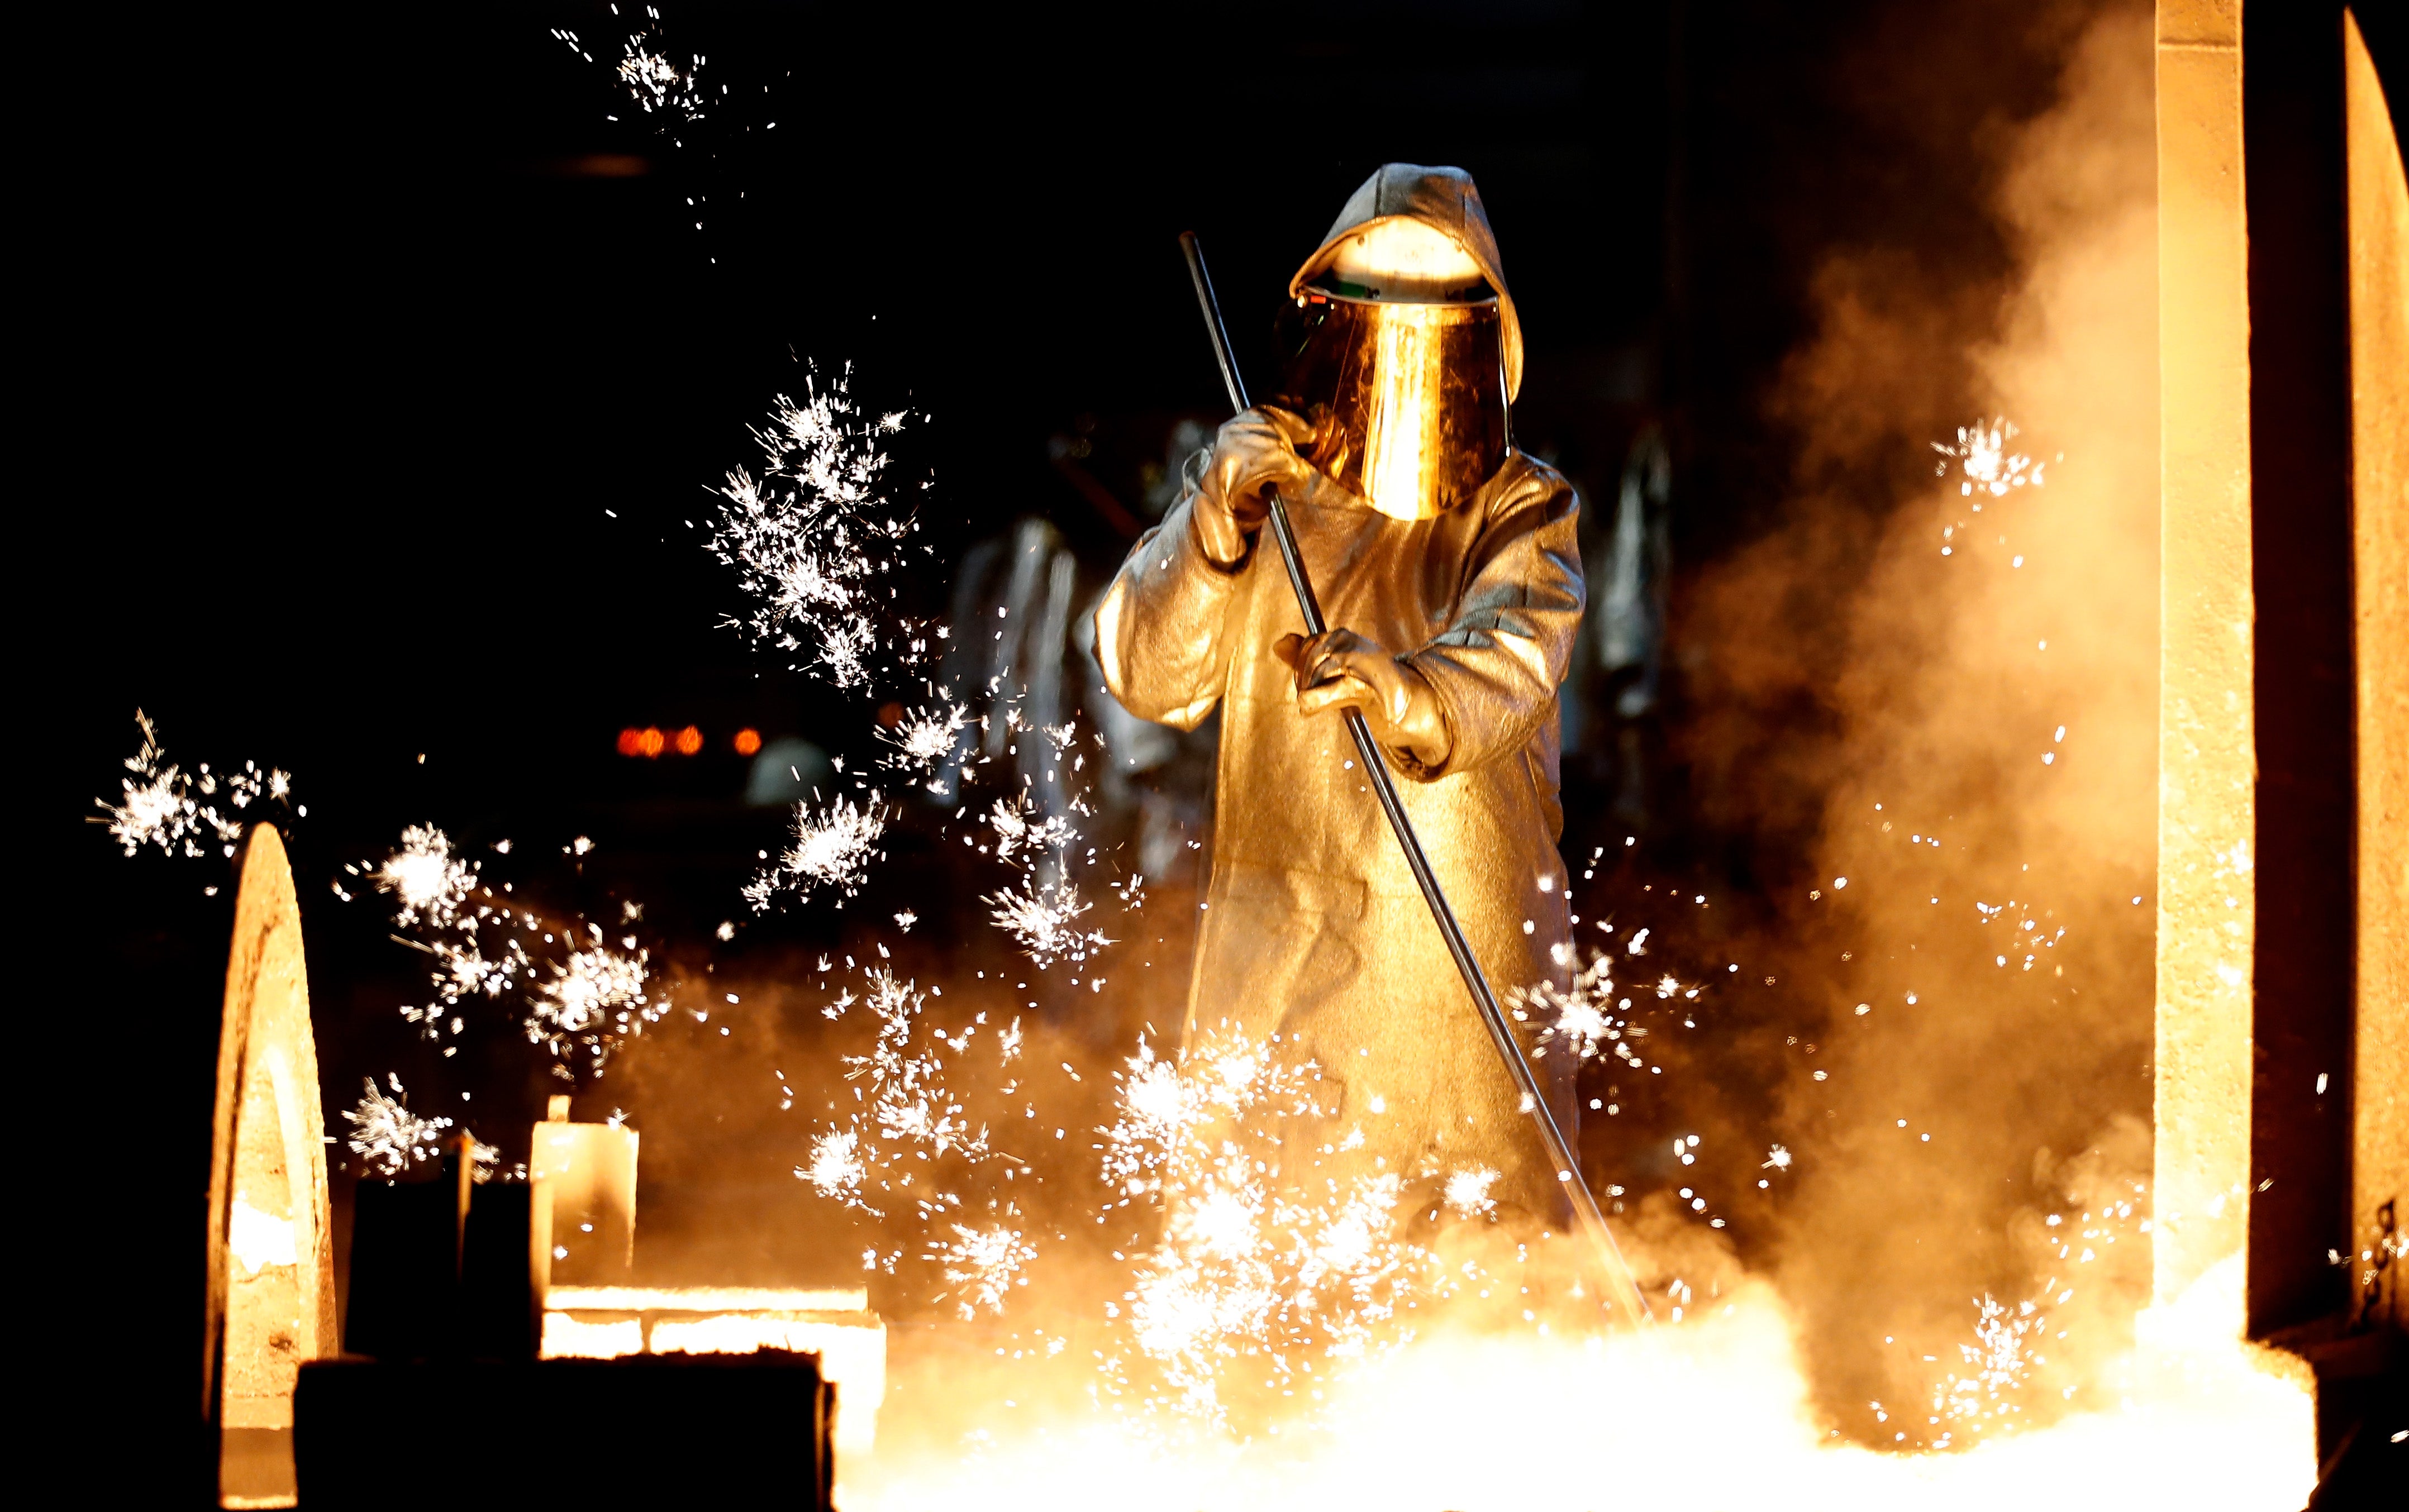 A steel worker takes a steel sample at blast furnace 8 of German corporation ThyssenKrupp in Duisburg, Germany